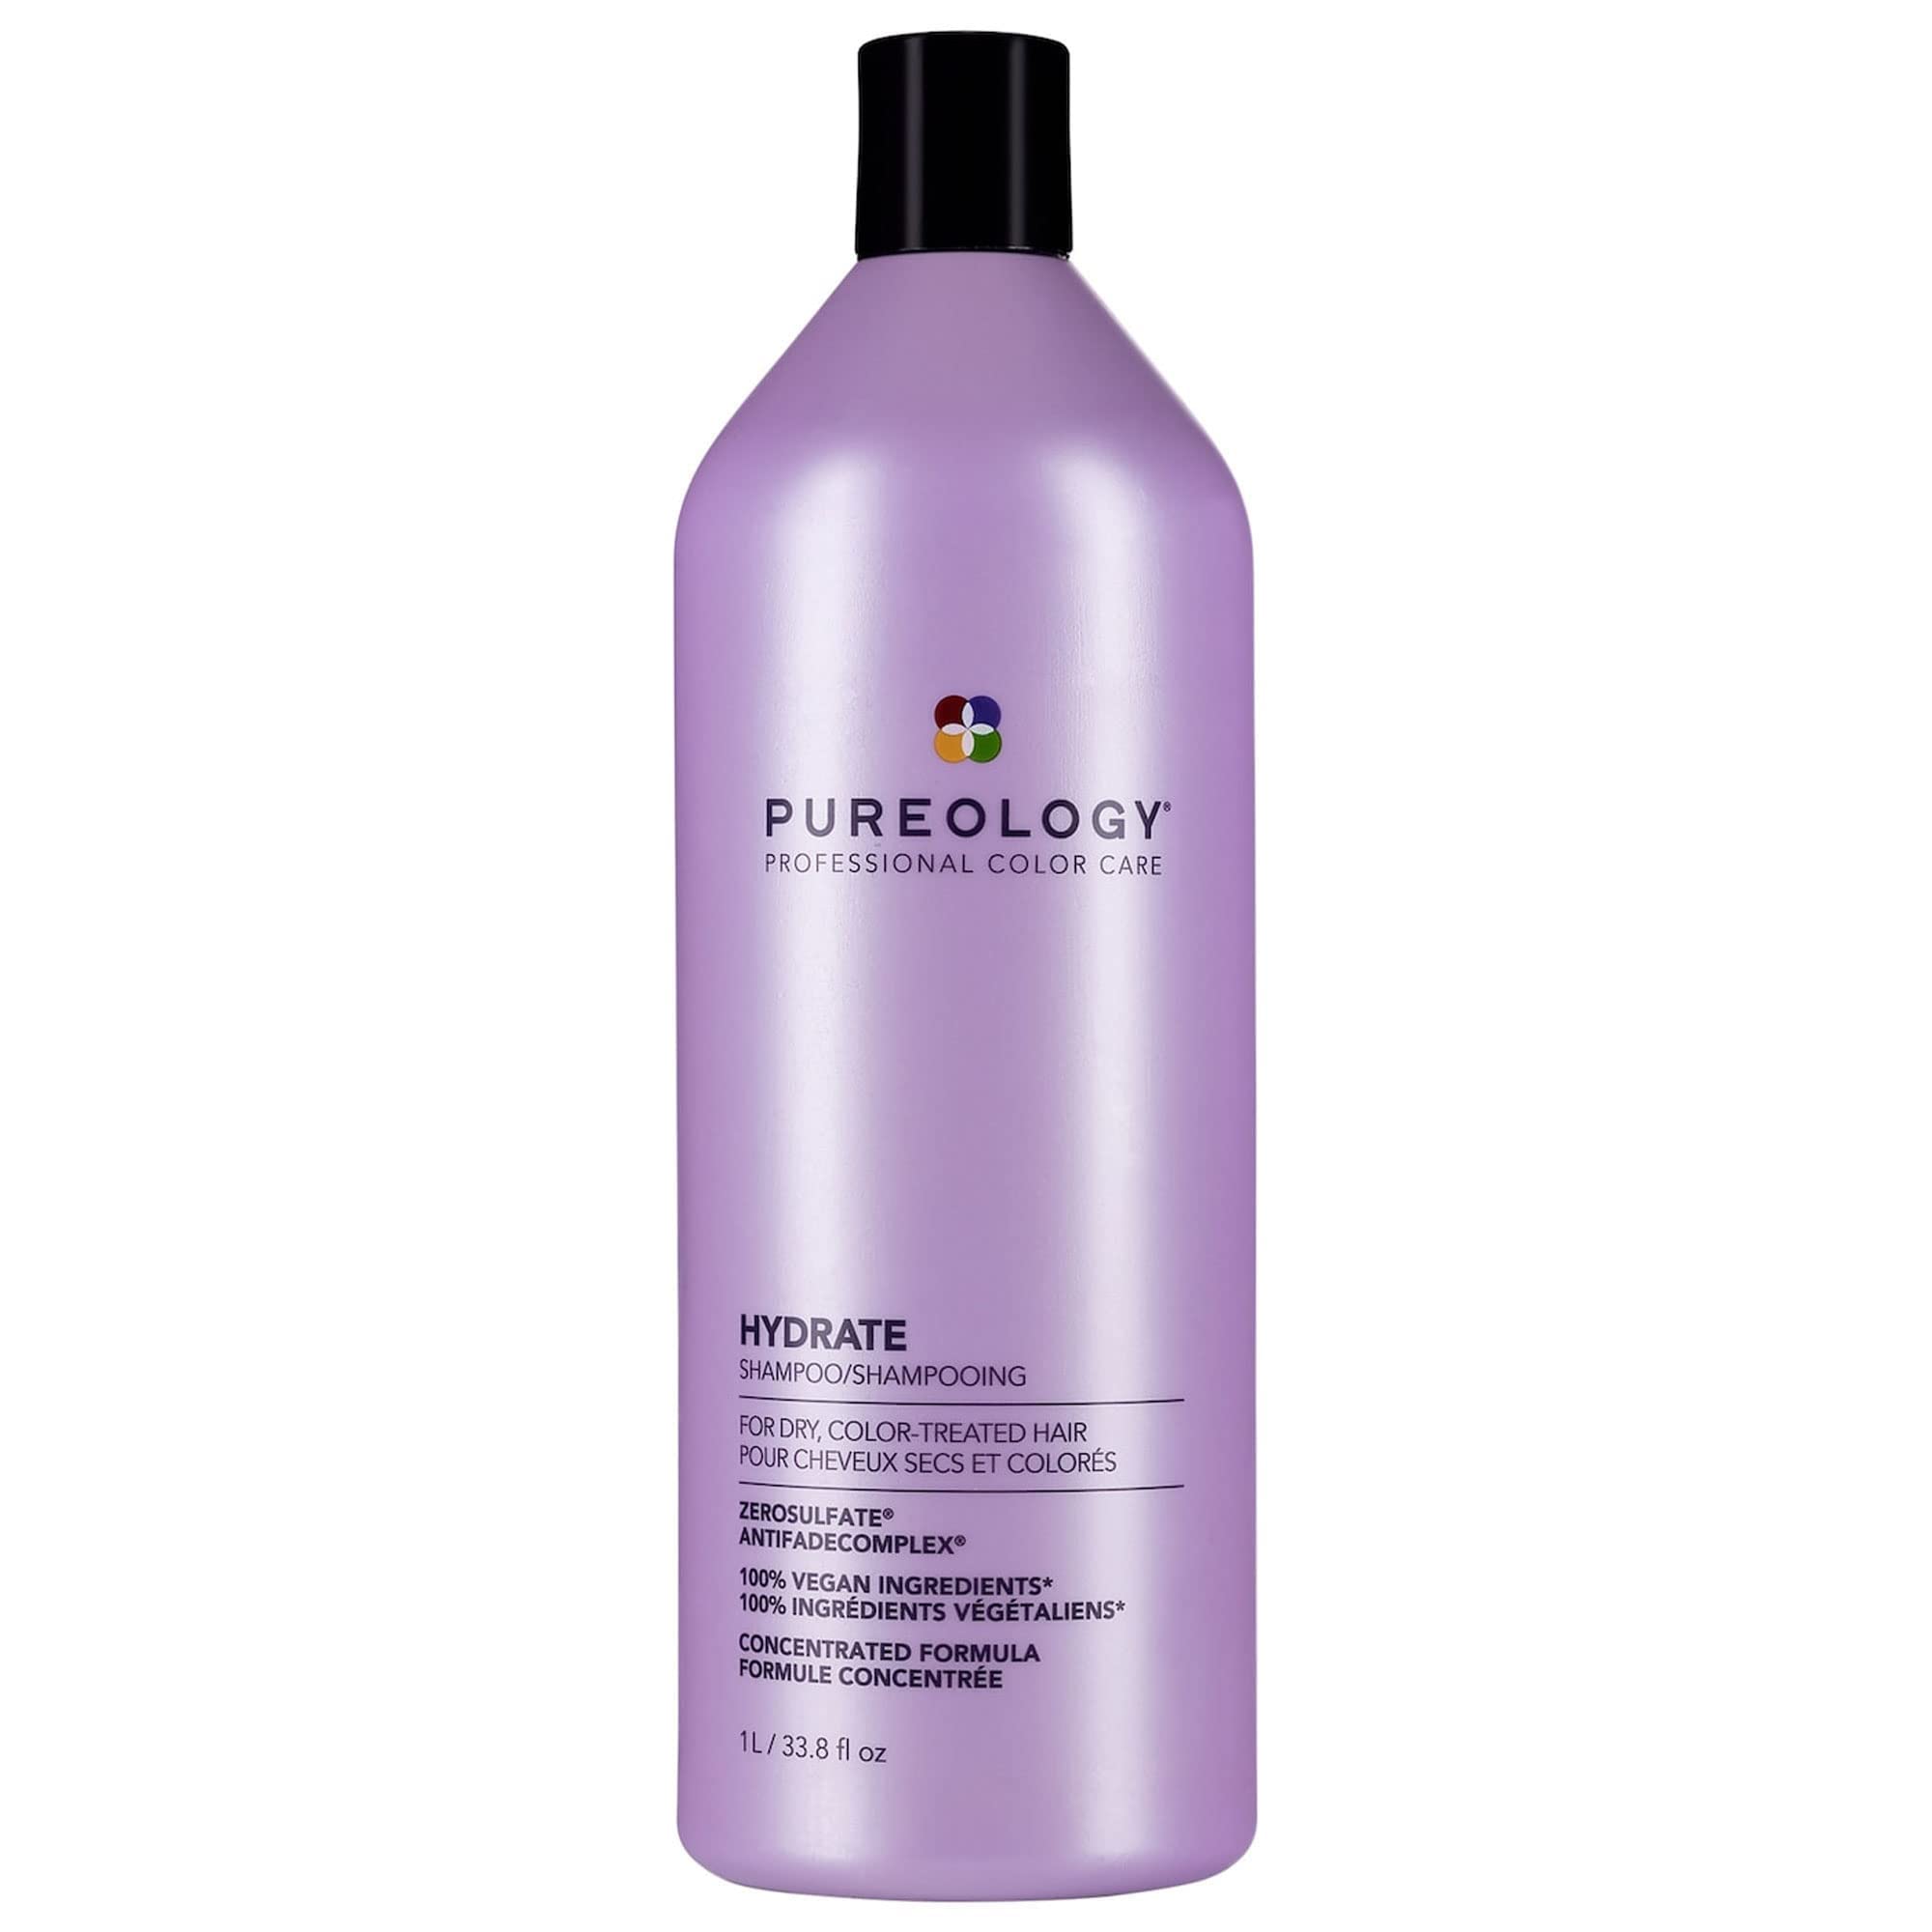 Pureology Hydrate Moisturizing Shampoo | Softens and Deeply Hydrates Dry Hair | For Medium to Thick Color Treated Hair | Sulfate-Free | Vegan